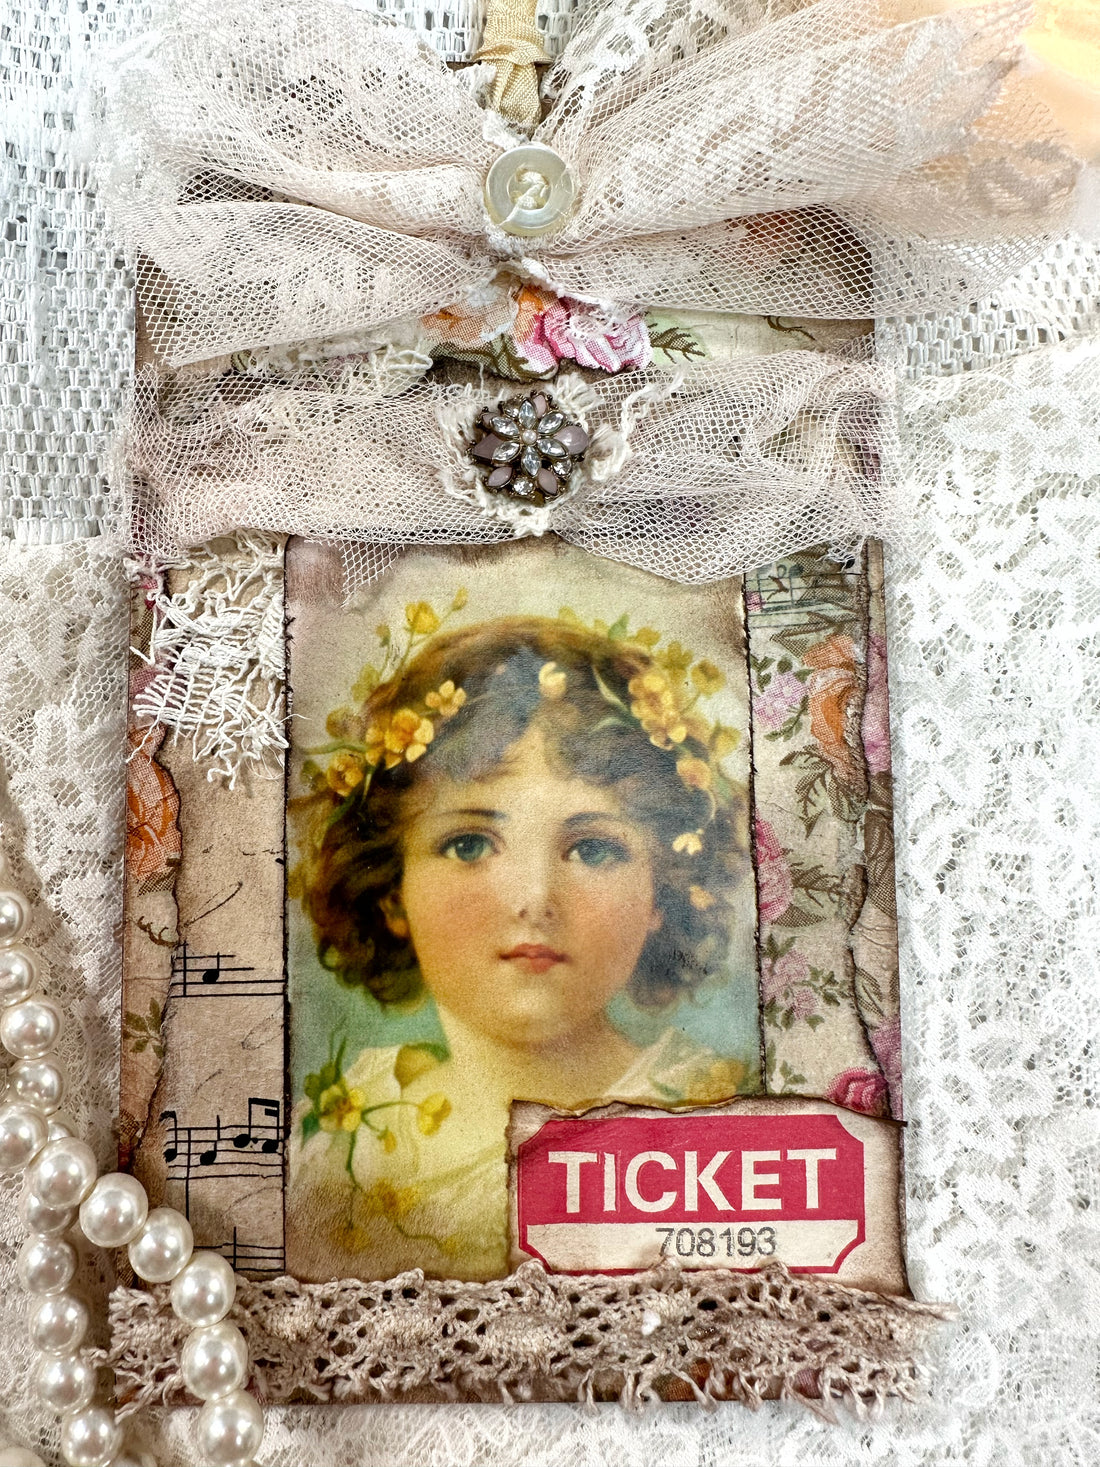 Upcycled journal with a vintage look using napkins and essentials from Essential Shabby collections